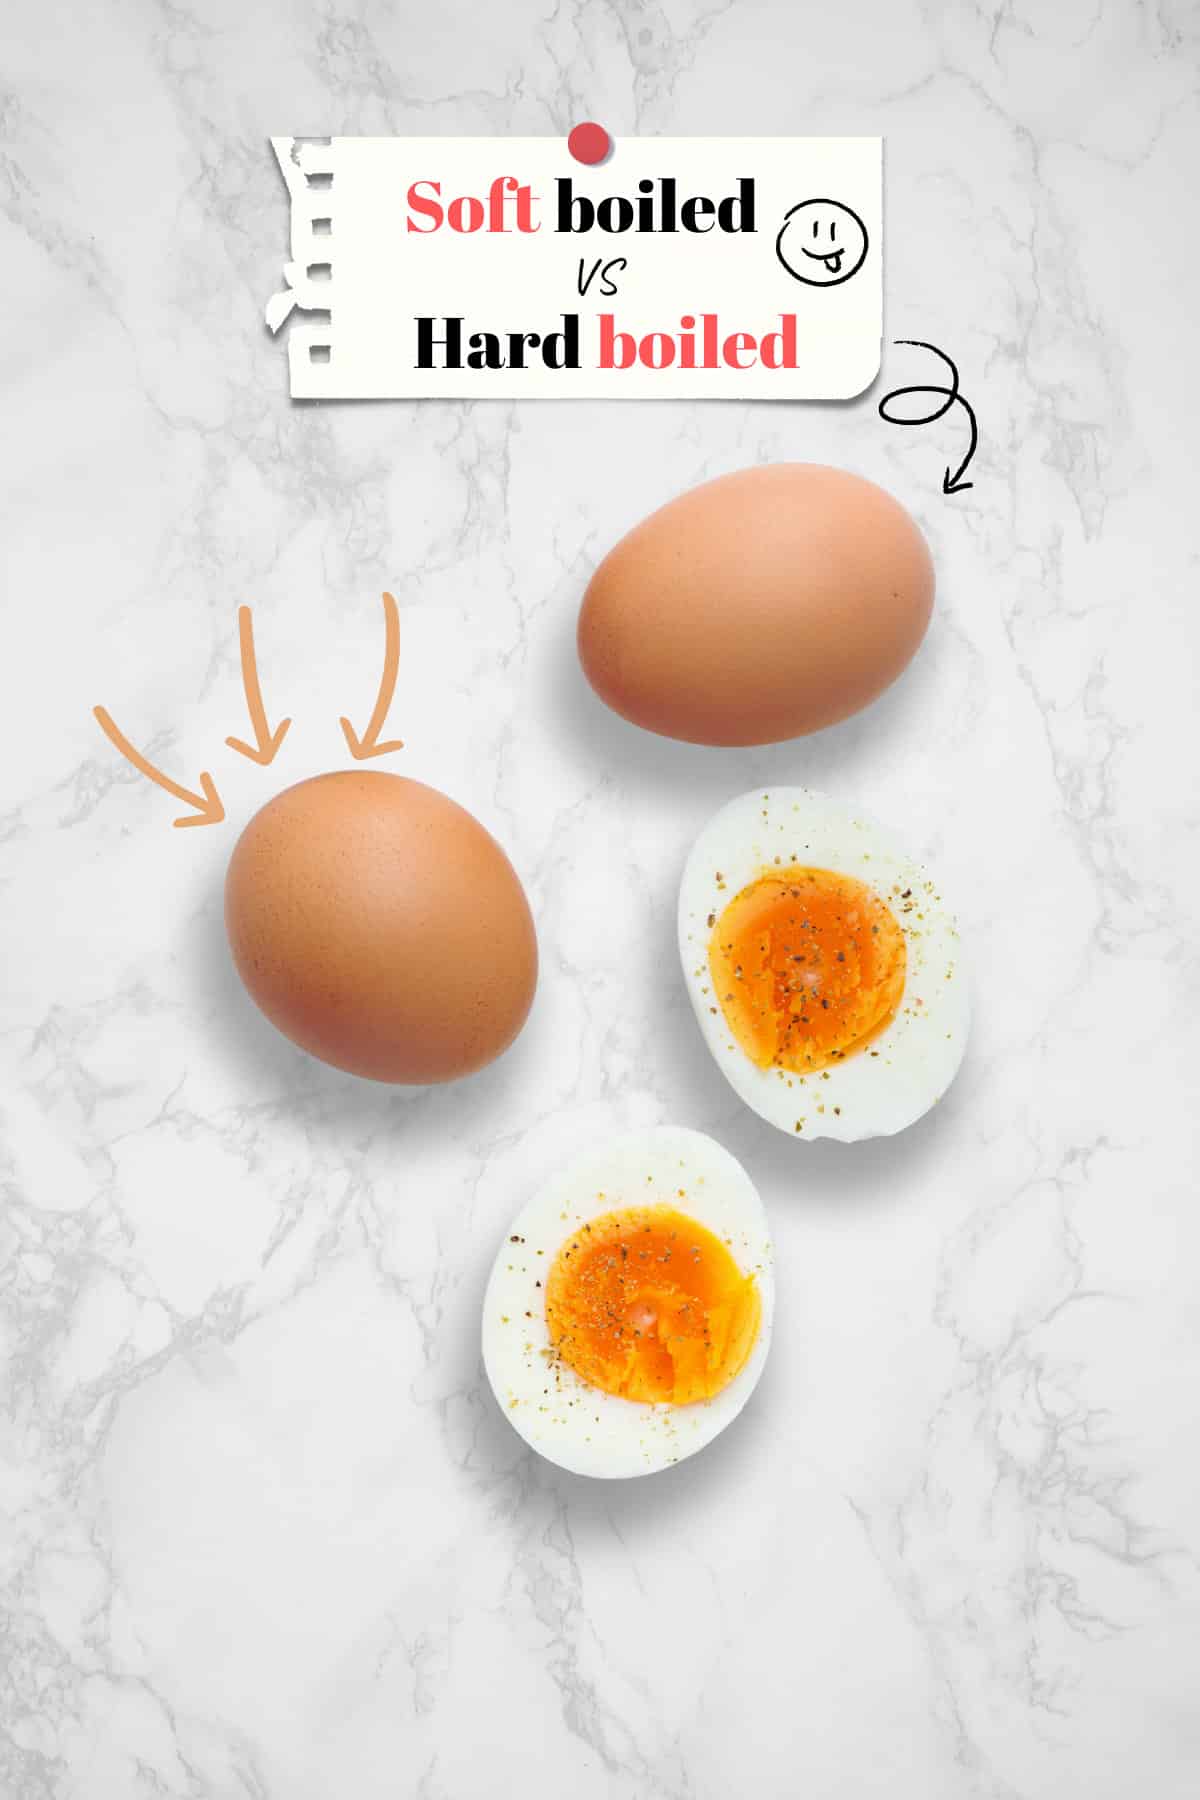 A soft-boiled egg sliced in half with a jammy yolk, and a peeled hard-boiled egg.